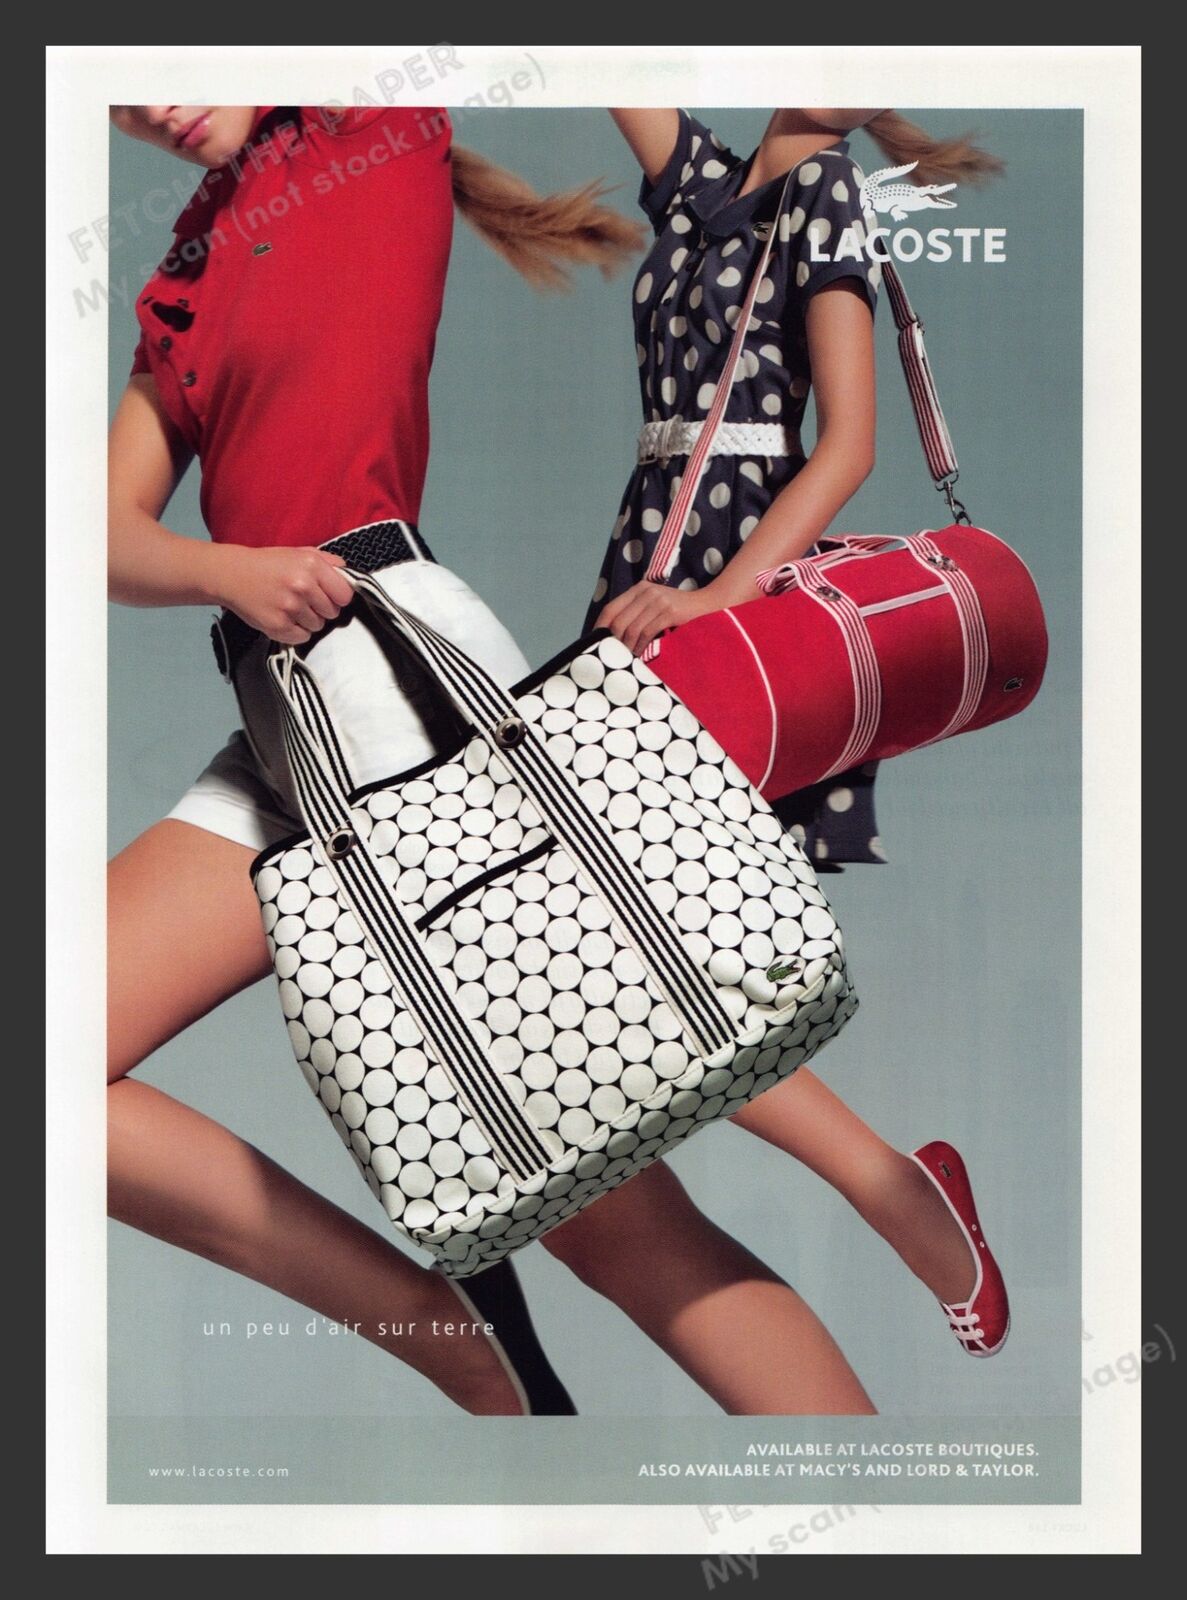 Lacoste Bags Jumping Models 2000s Print Advertisement Ad 2008